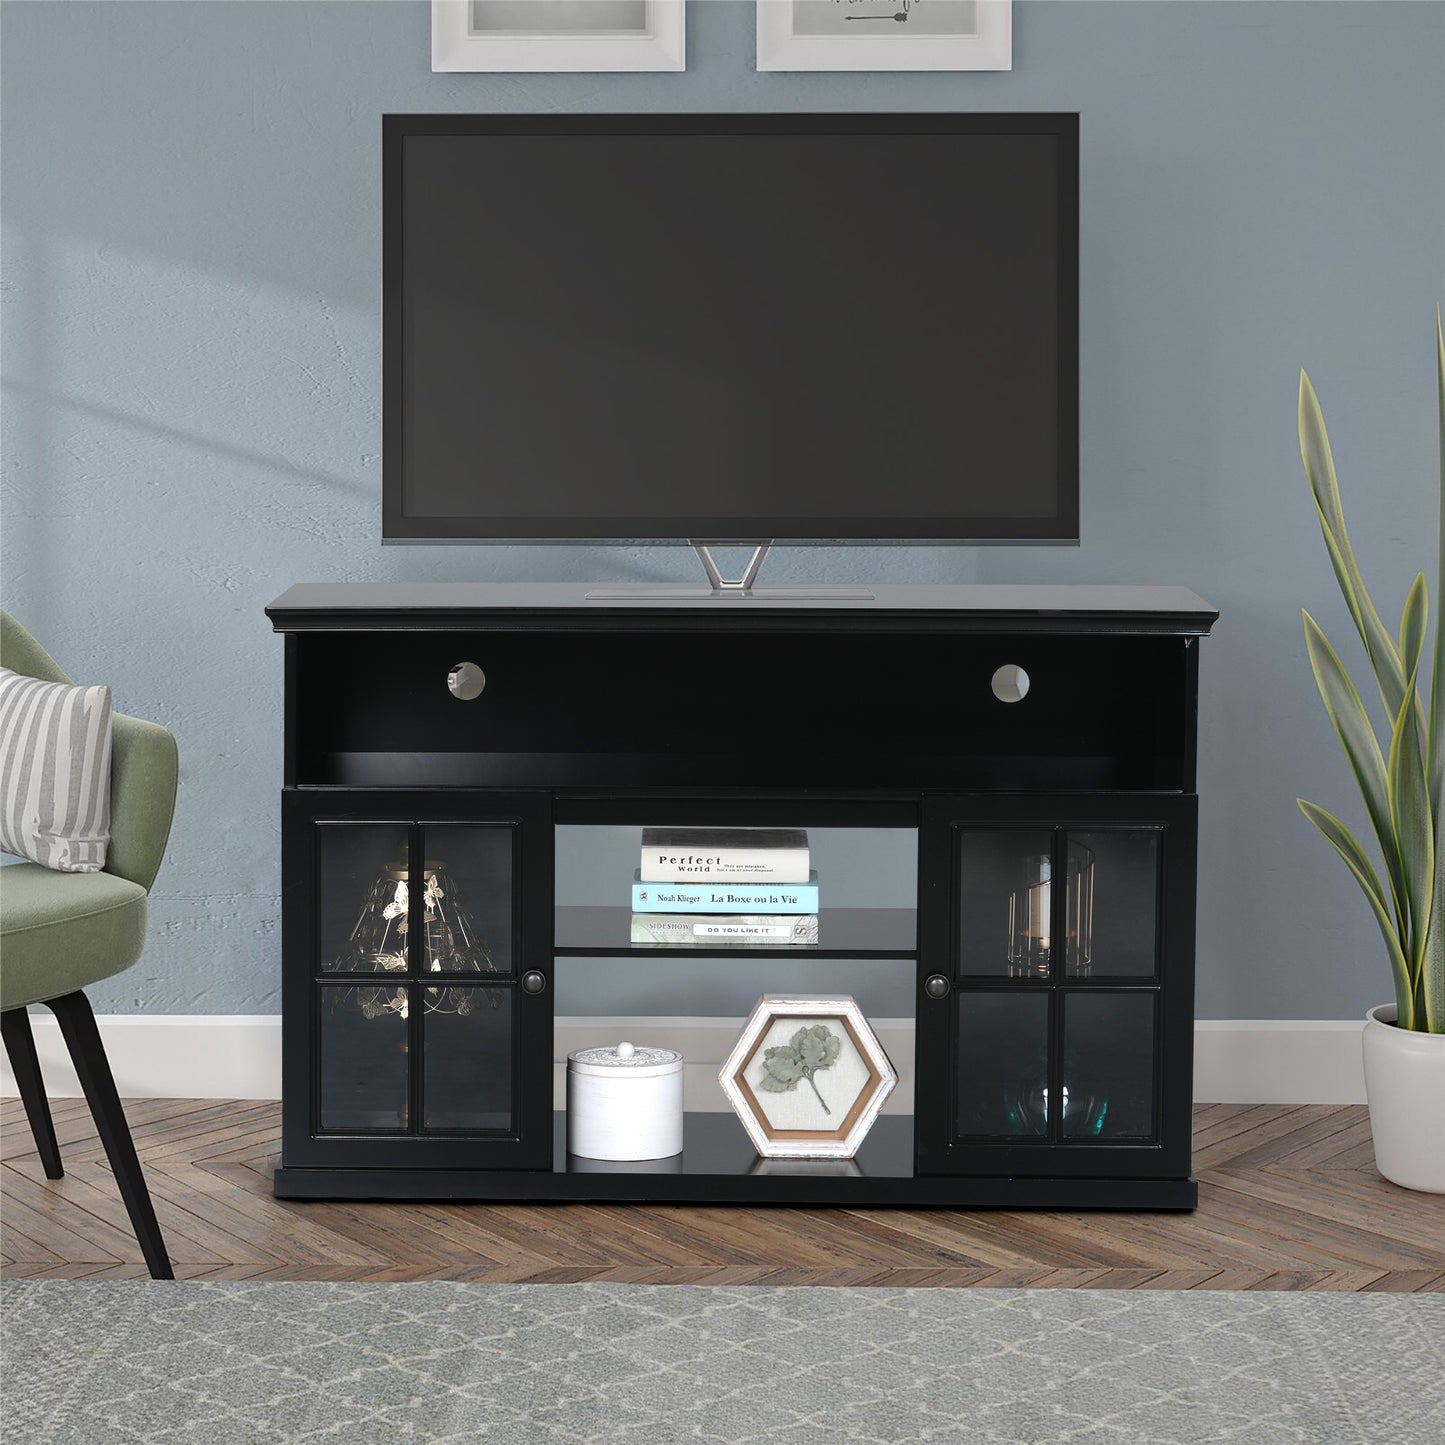 Sophia & William TV Stand for TVs up to 55", Black